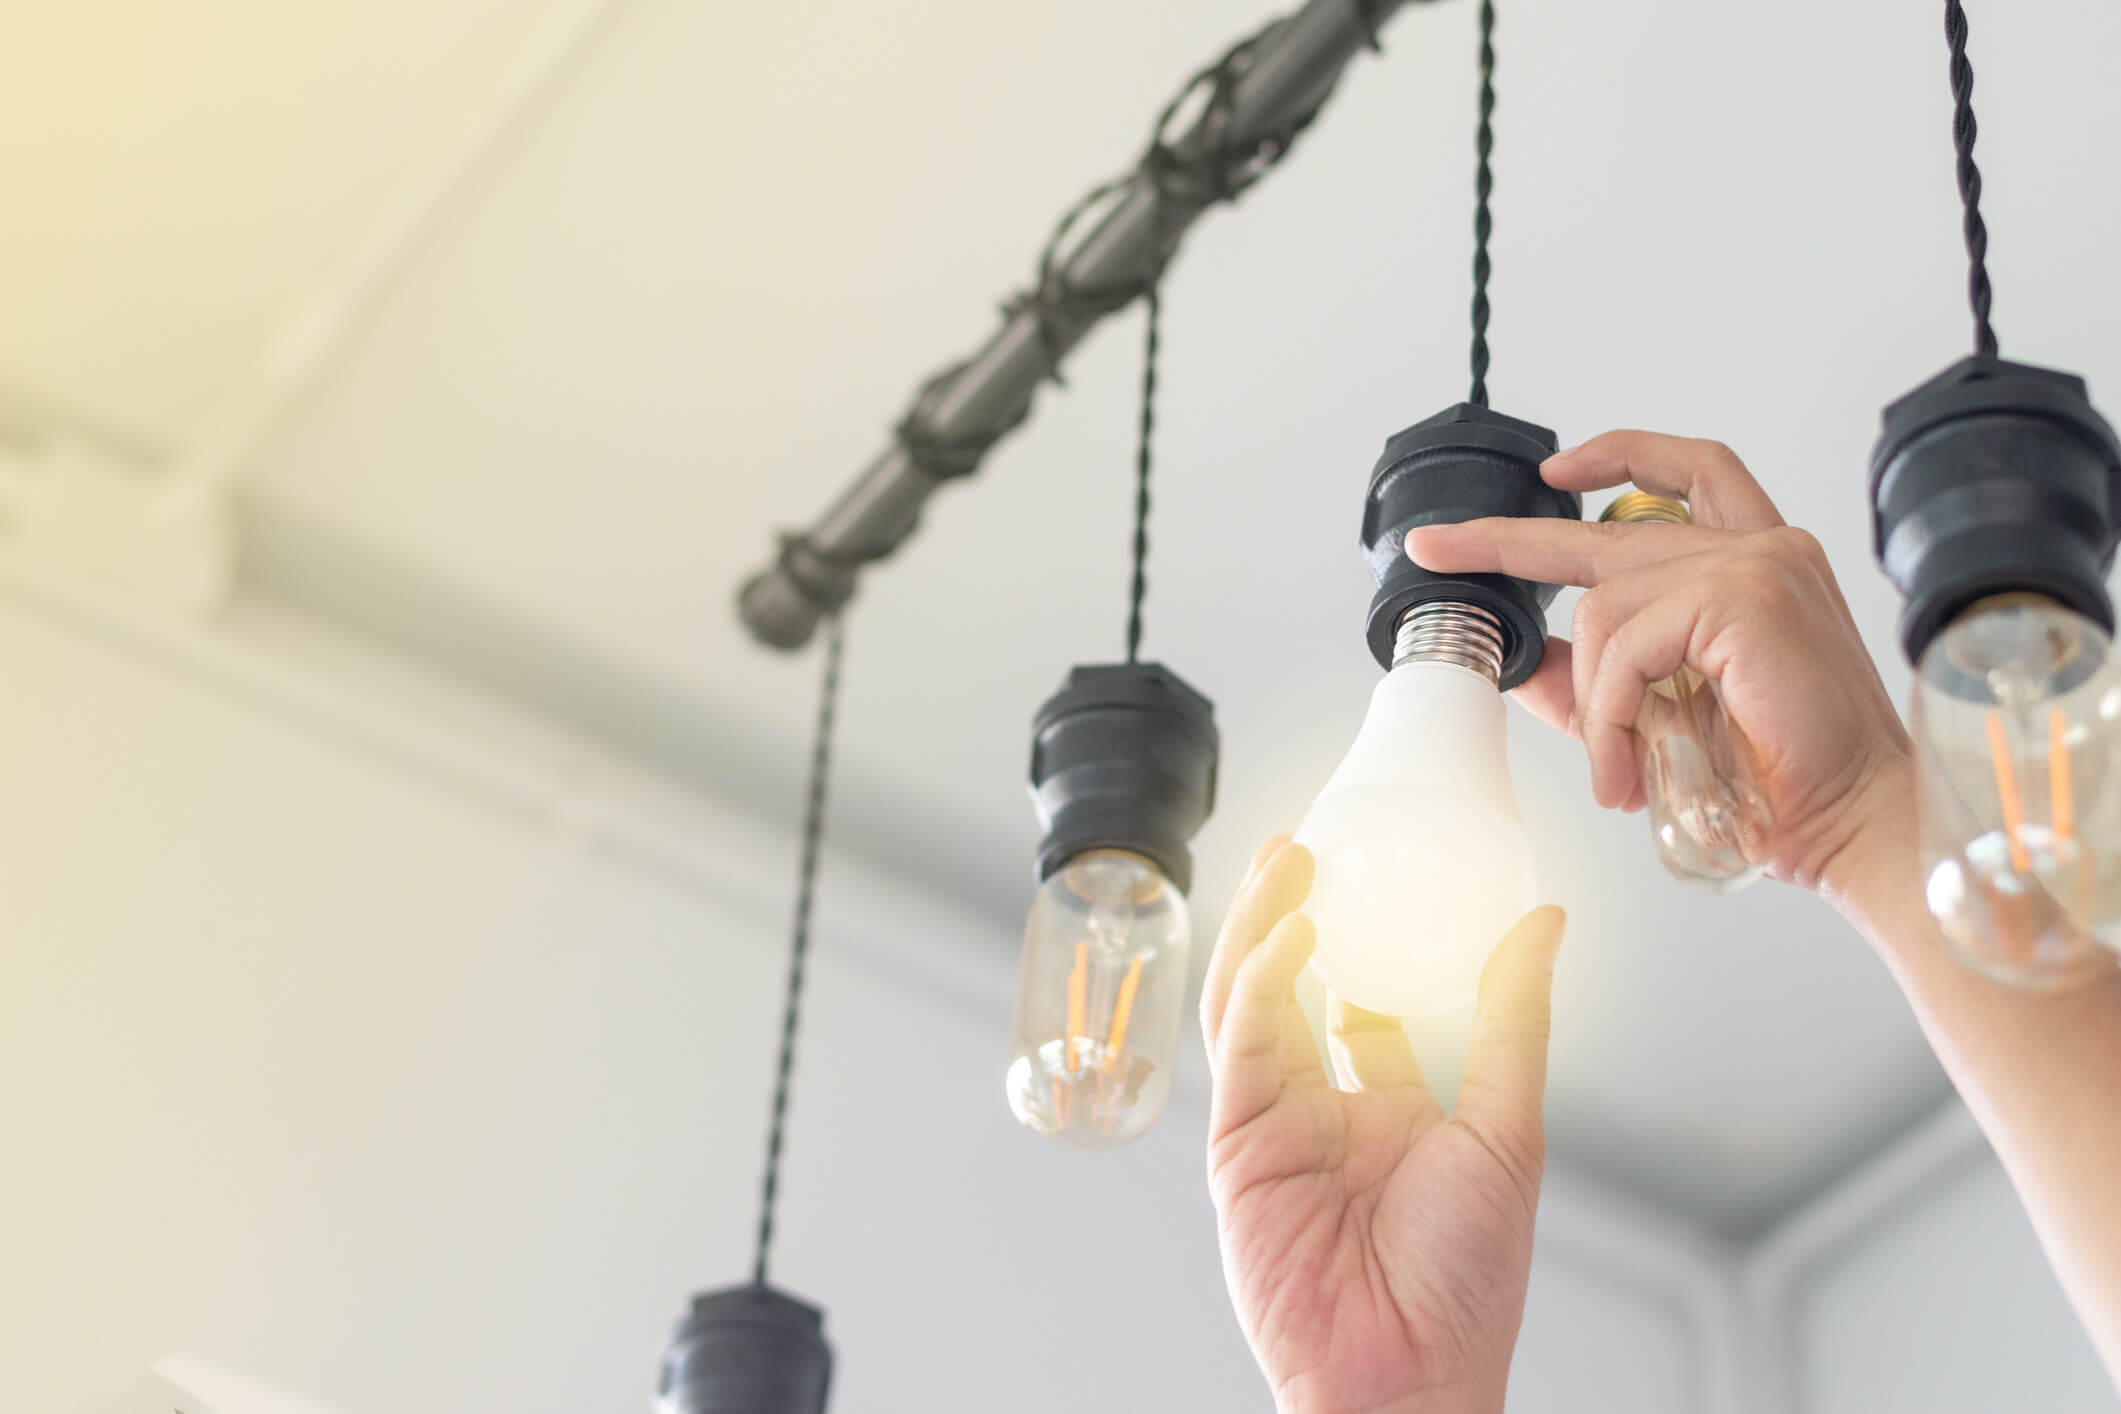 A business owner replaces old filament light bulbs with more energy efficient bulbs